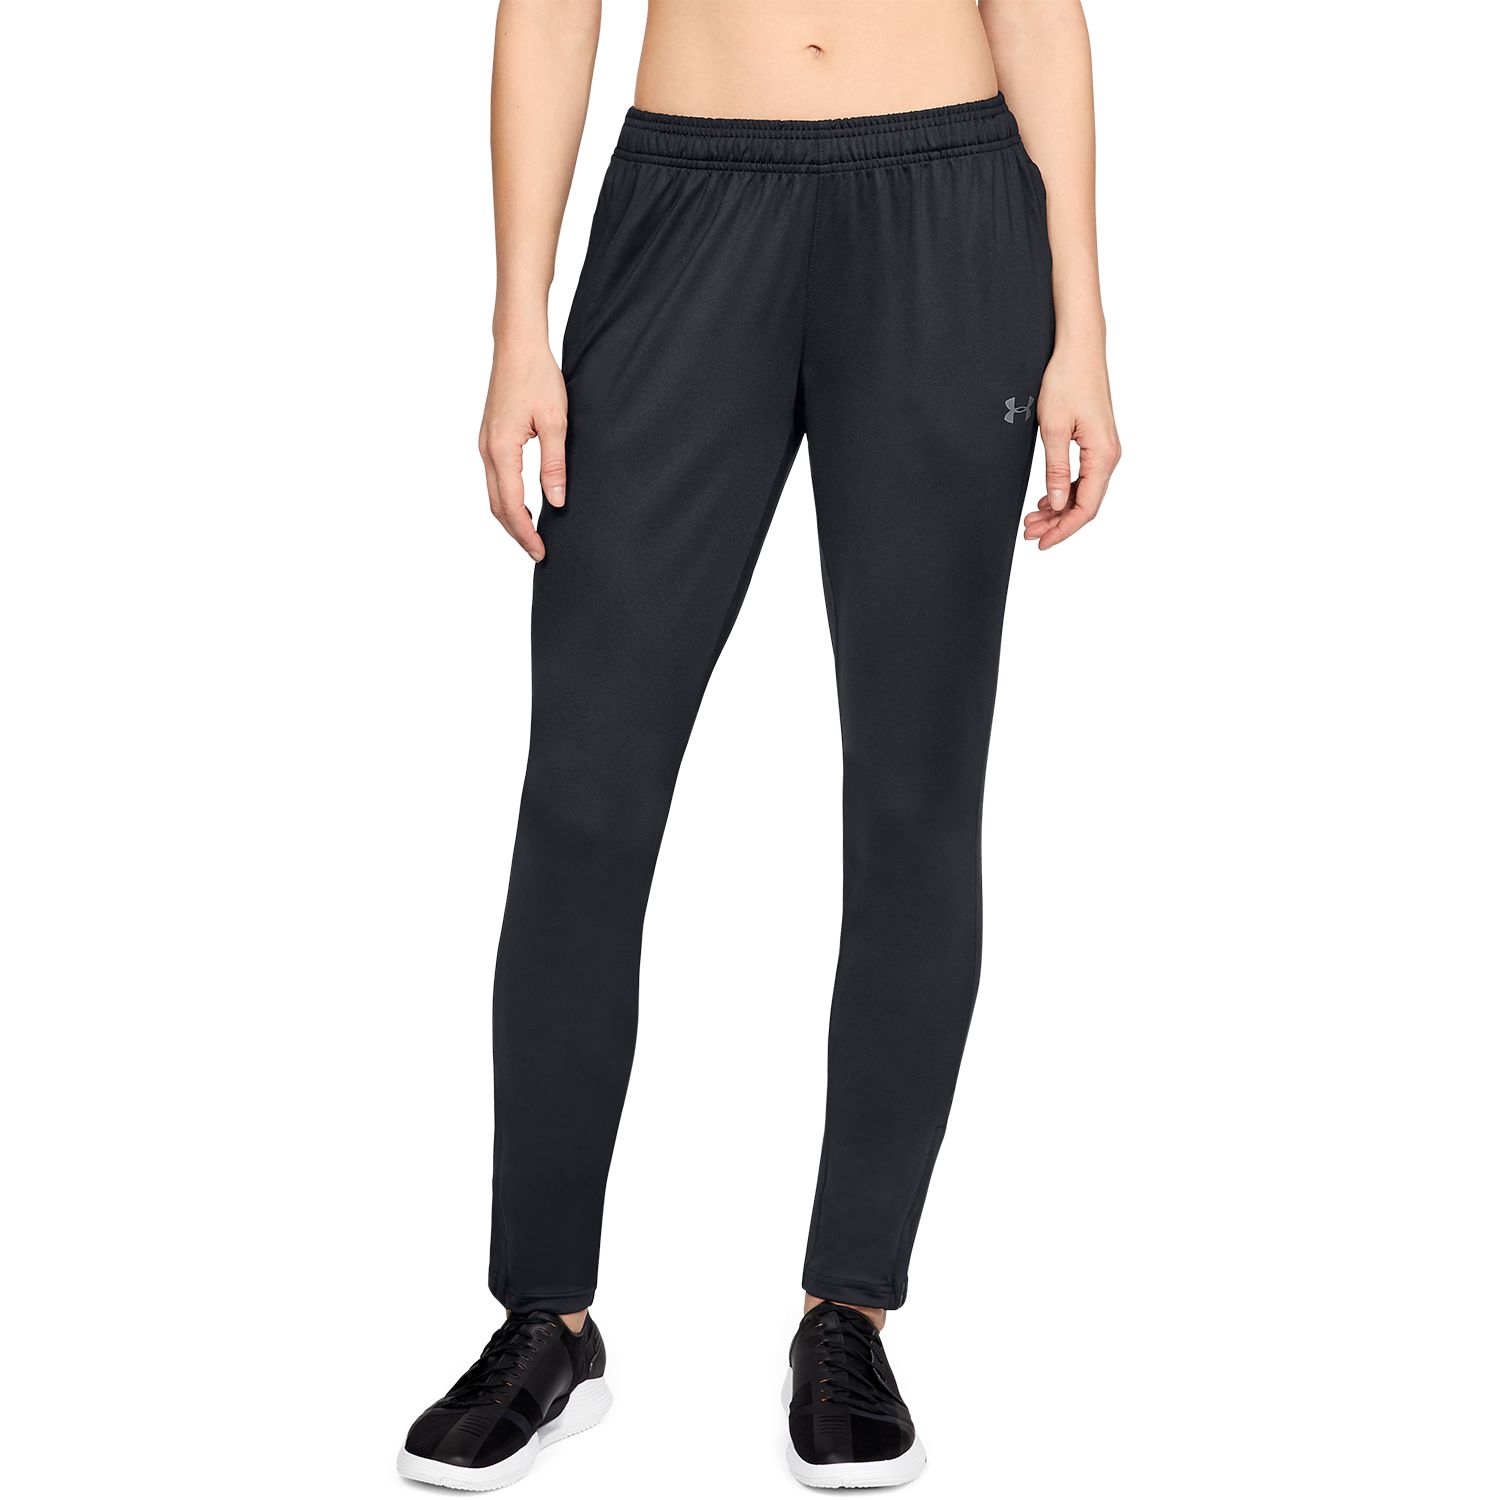 Details about   Under Armour Challenger III Training Pant Adults 